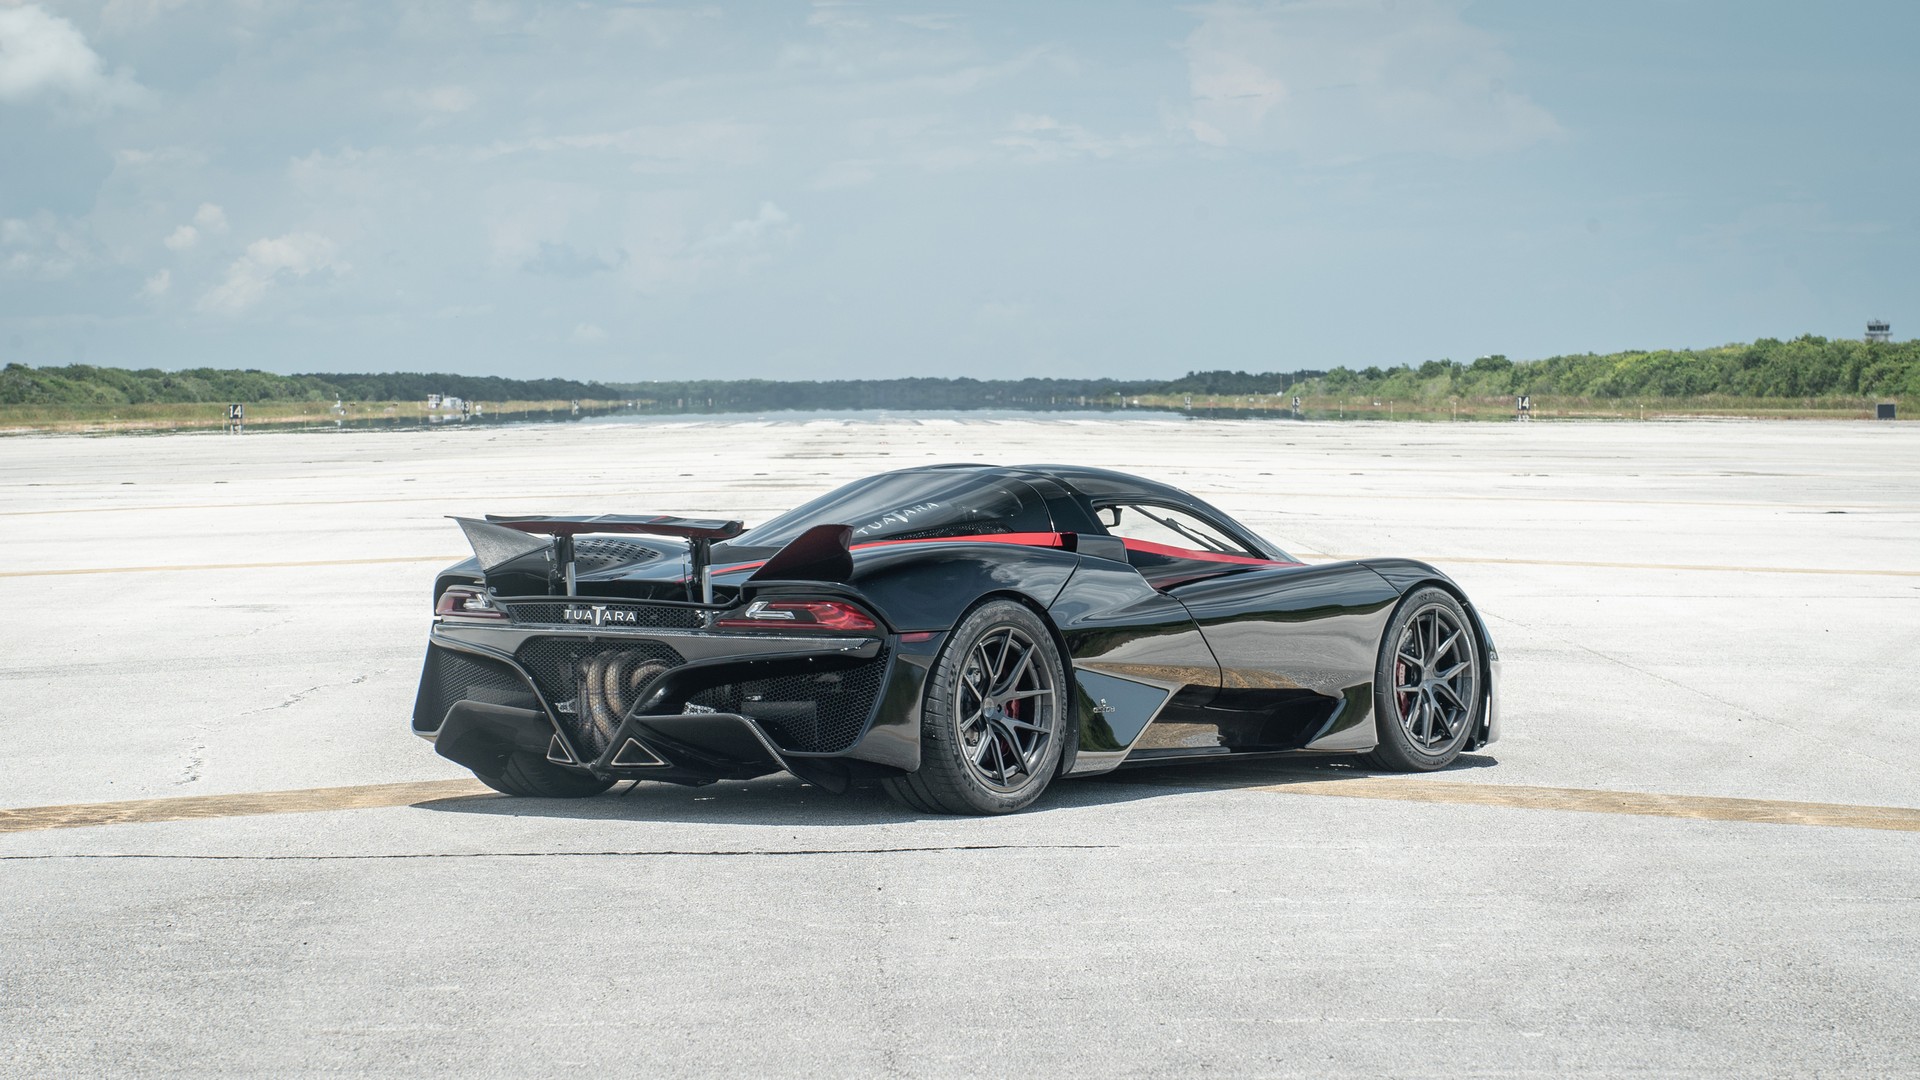 SSC Working On An Electrified, AWD Tuatara With Front Electric Motors - CarScoops